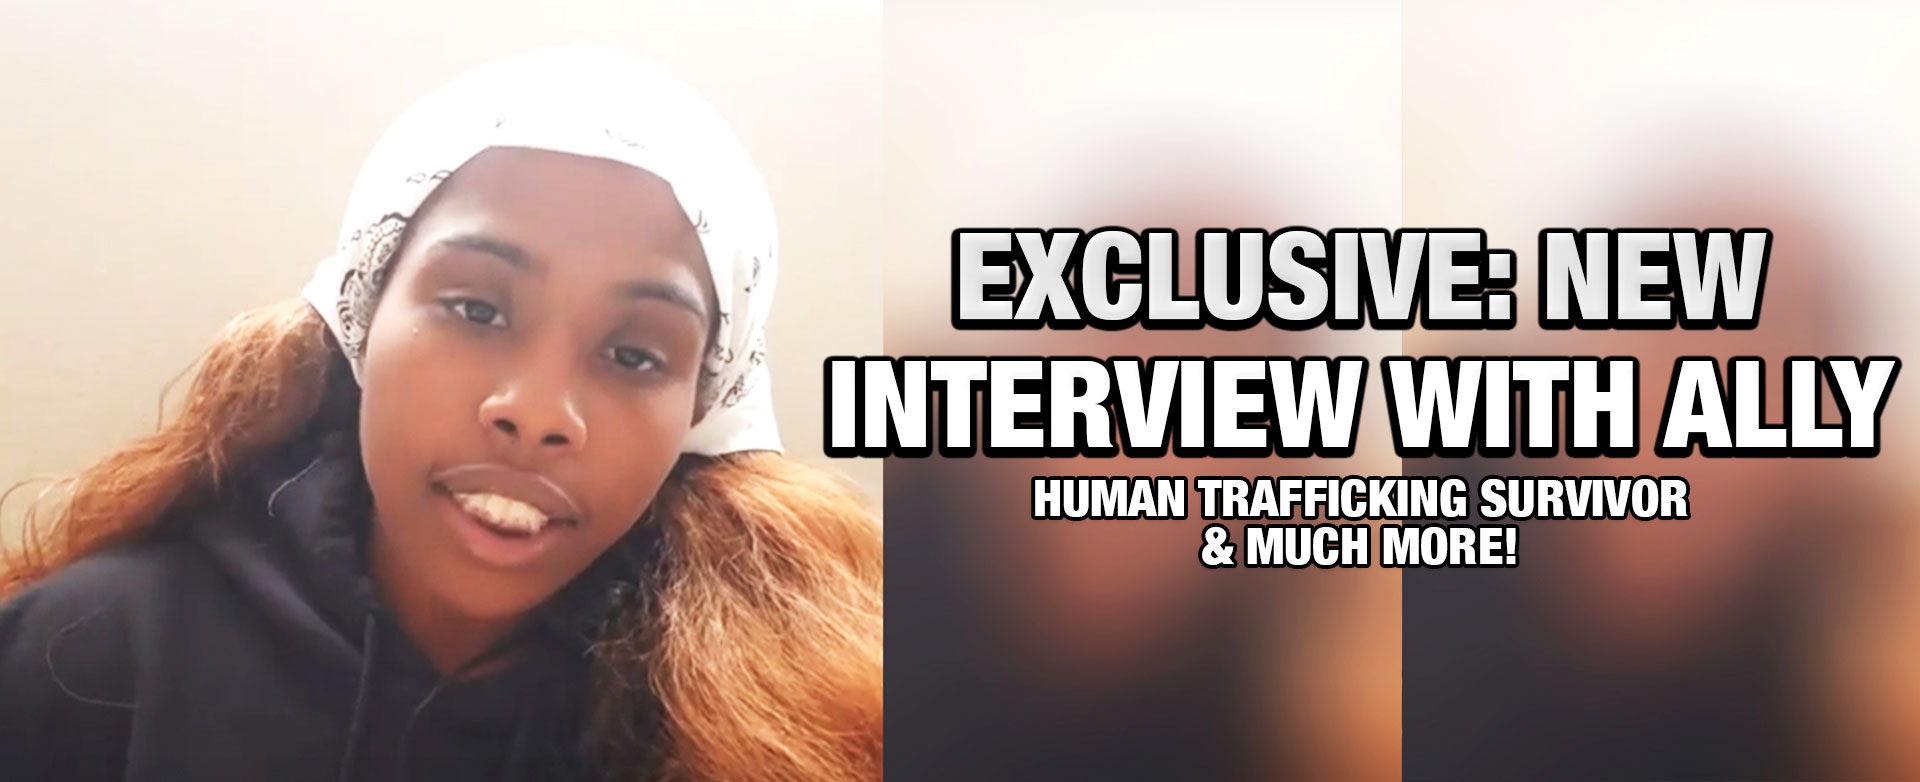 MyPatriotsNetwork-EXCLUSIVE: New Interview With Ally, Human Trafficking Survivor & Much More! April 1 2021 Update